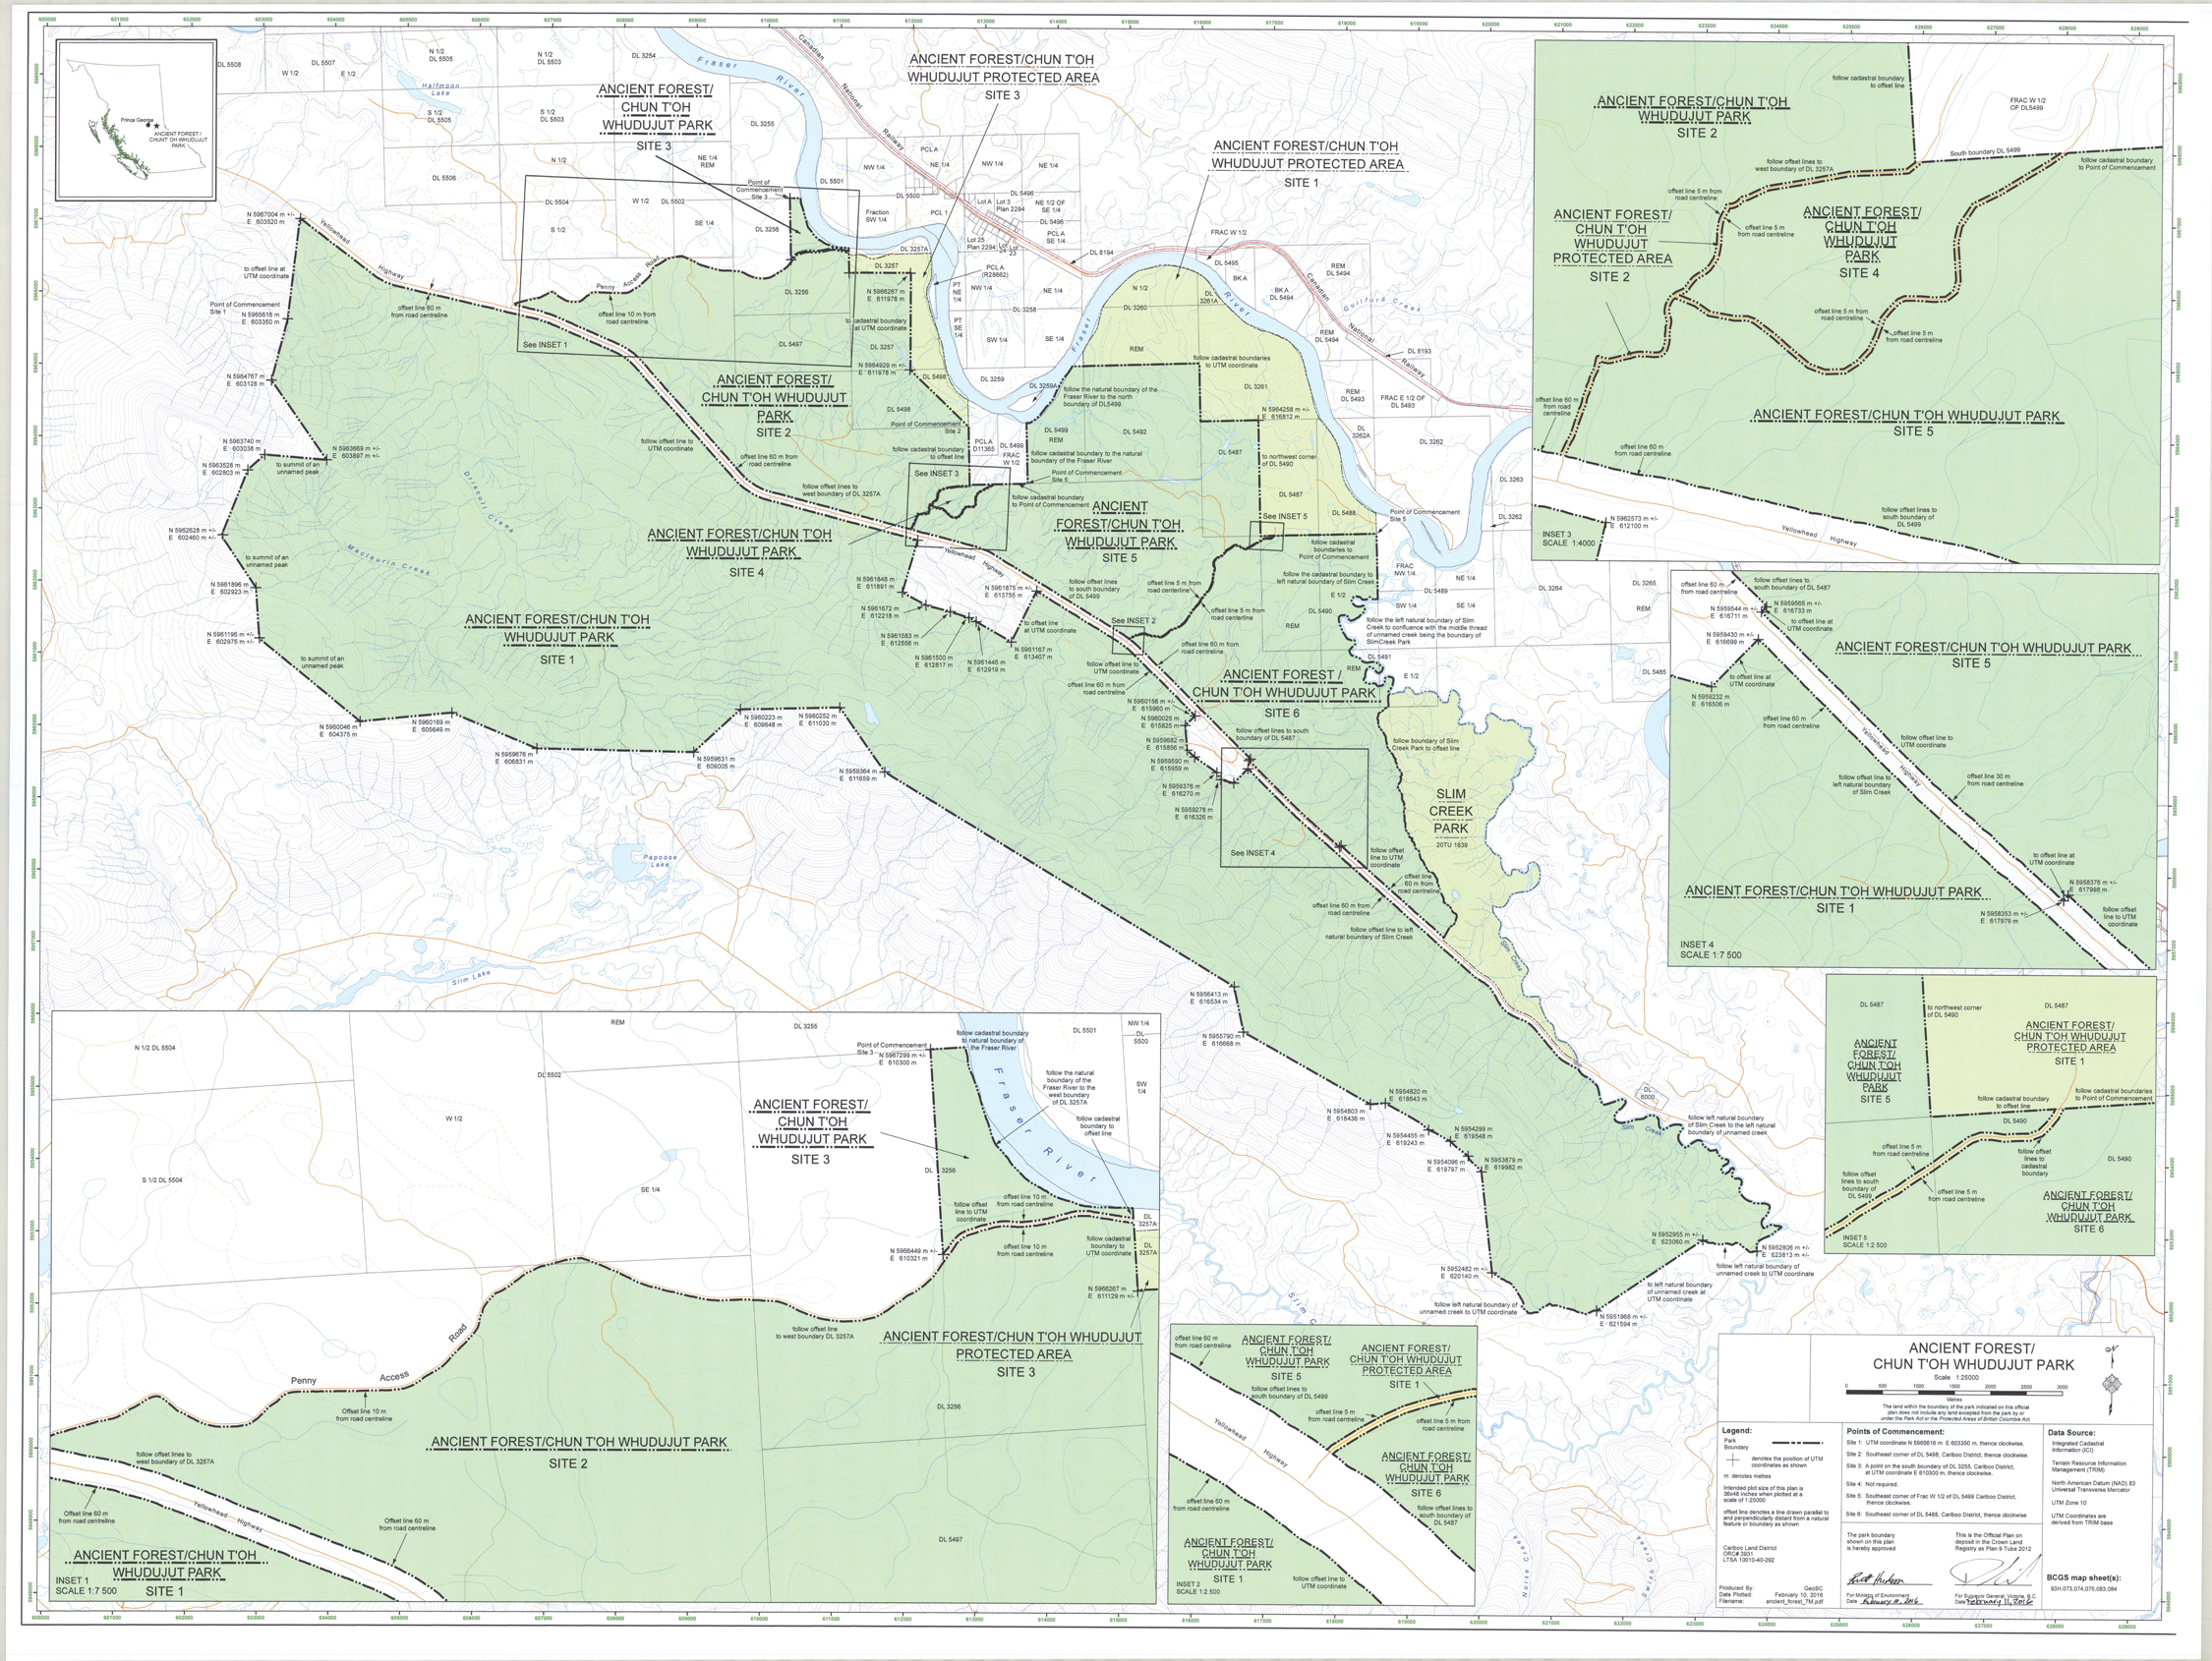 Ancient forest park & protected area boundaries released